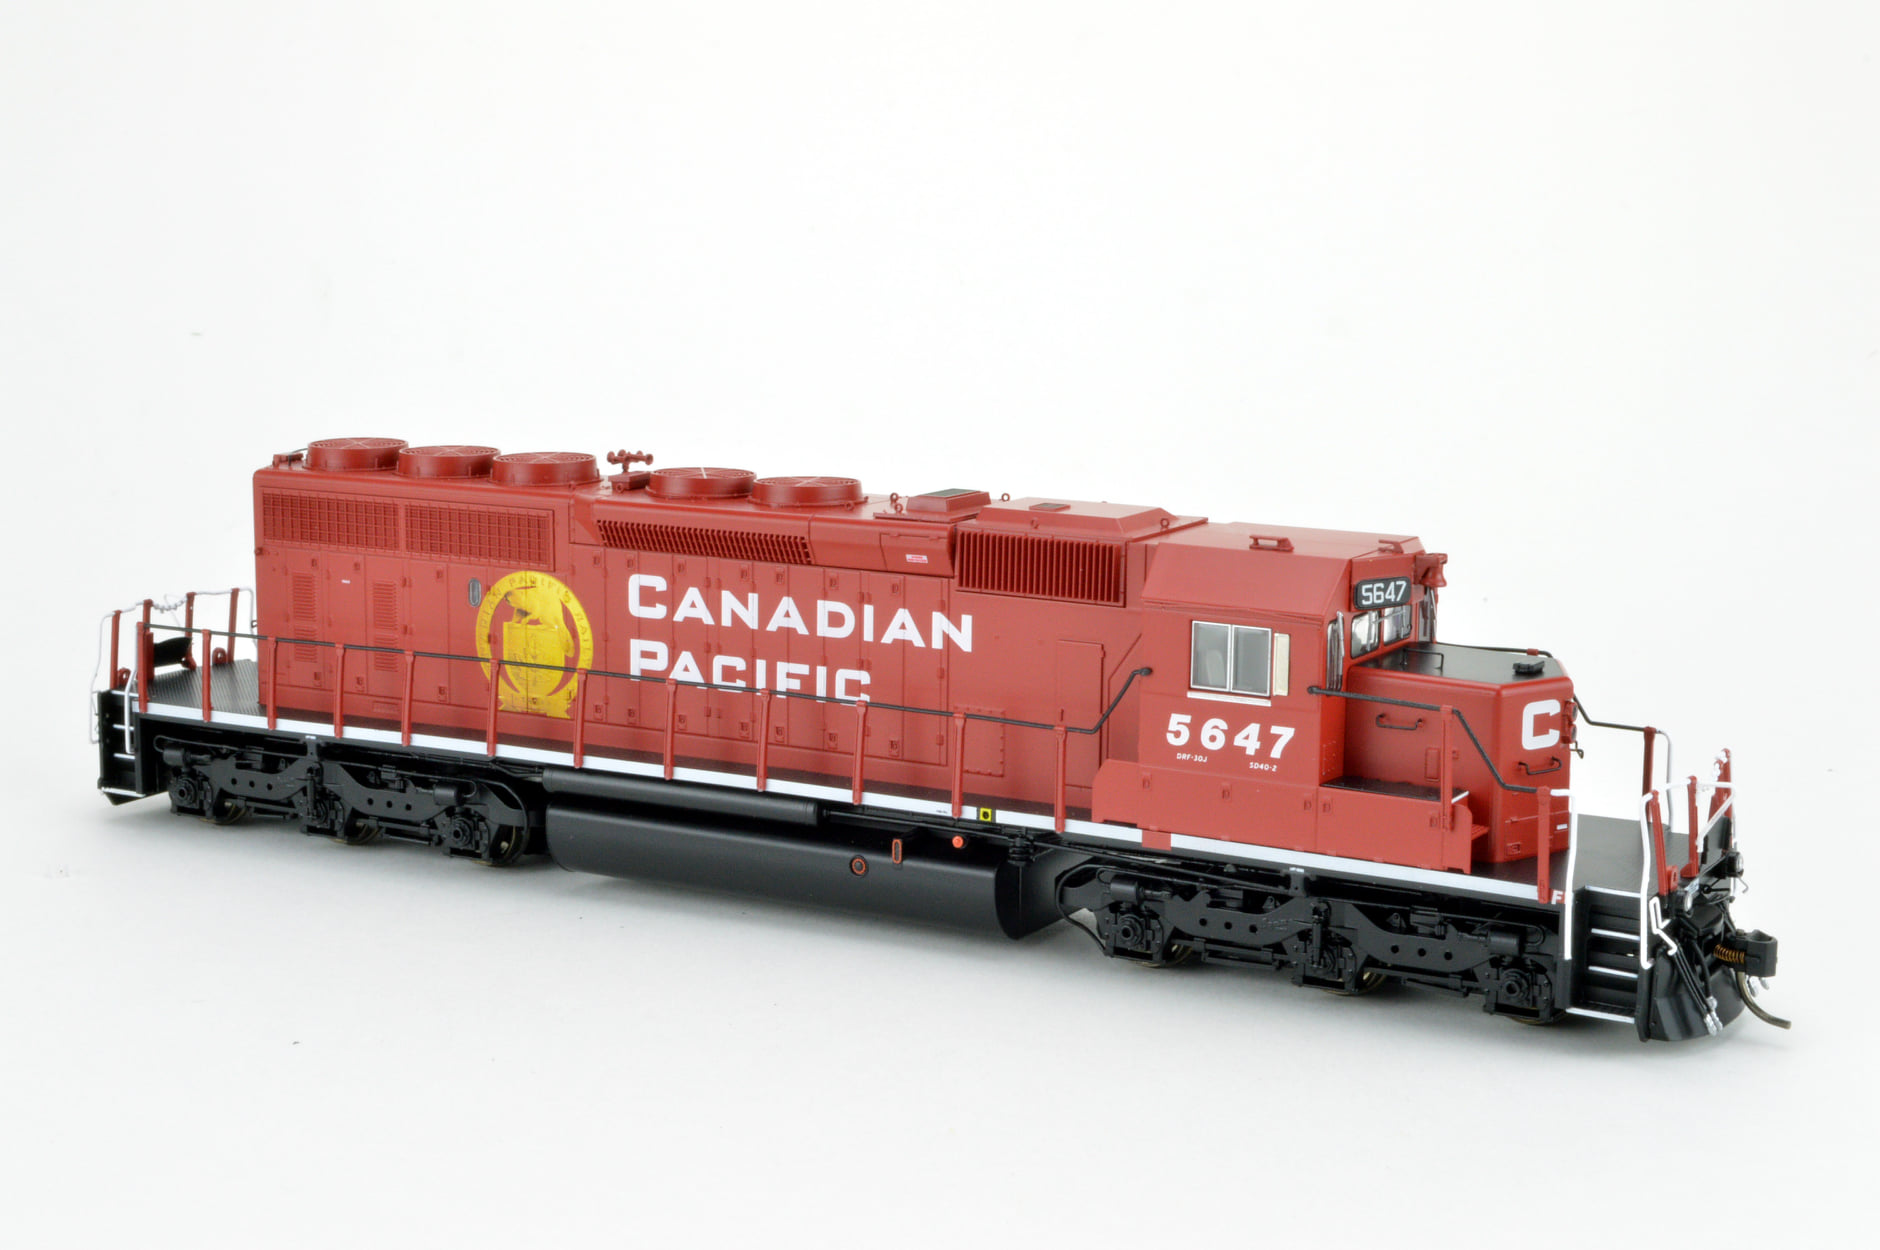 Bowser 25030 - HO GMD SD40-2 - DCC Ready - Canadian Pacific (Golden Beaver) #5647